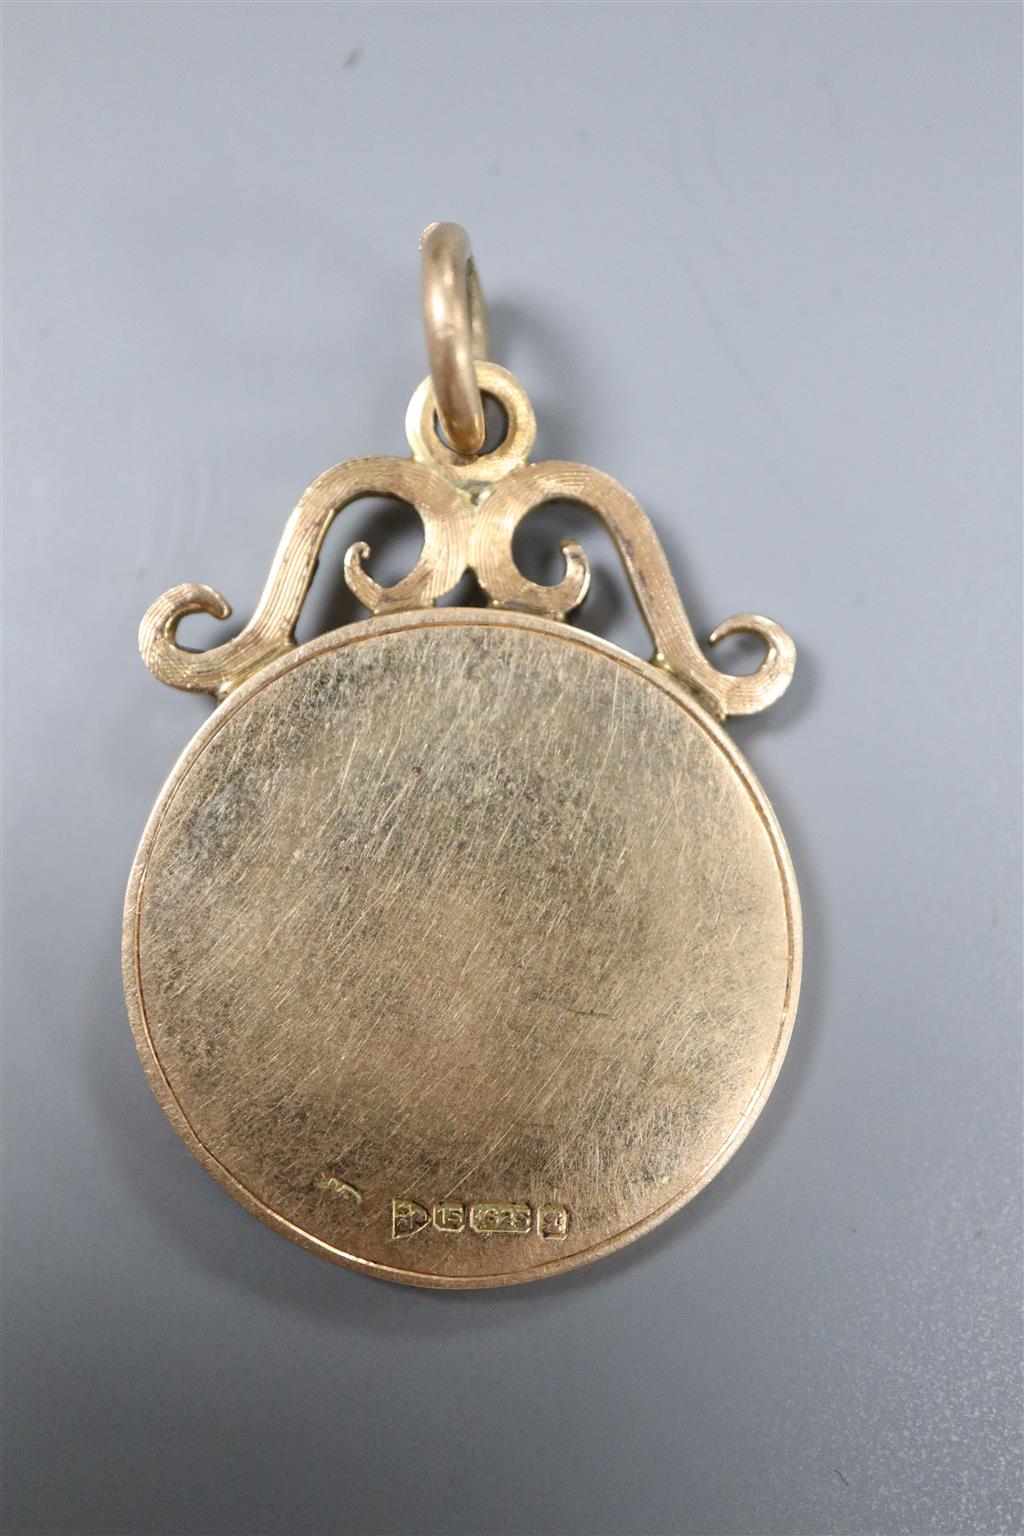 An early 20th century 15ct gold Birmingham Counties Golfing Alliance medallion,